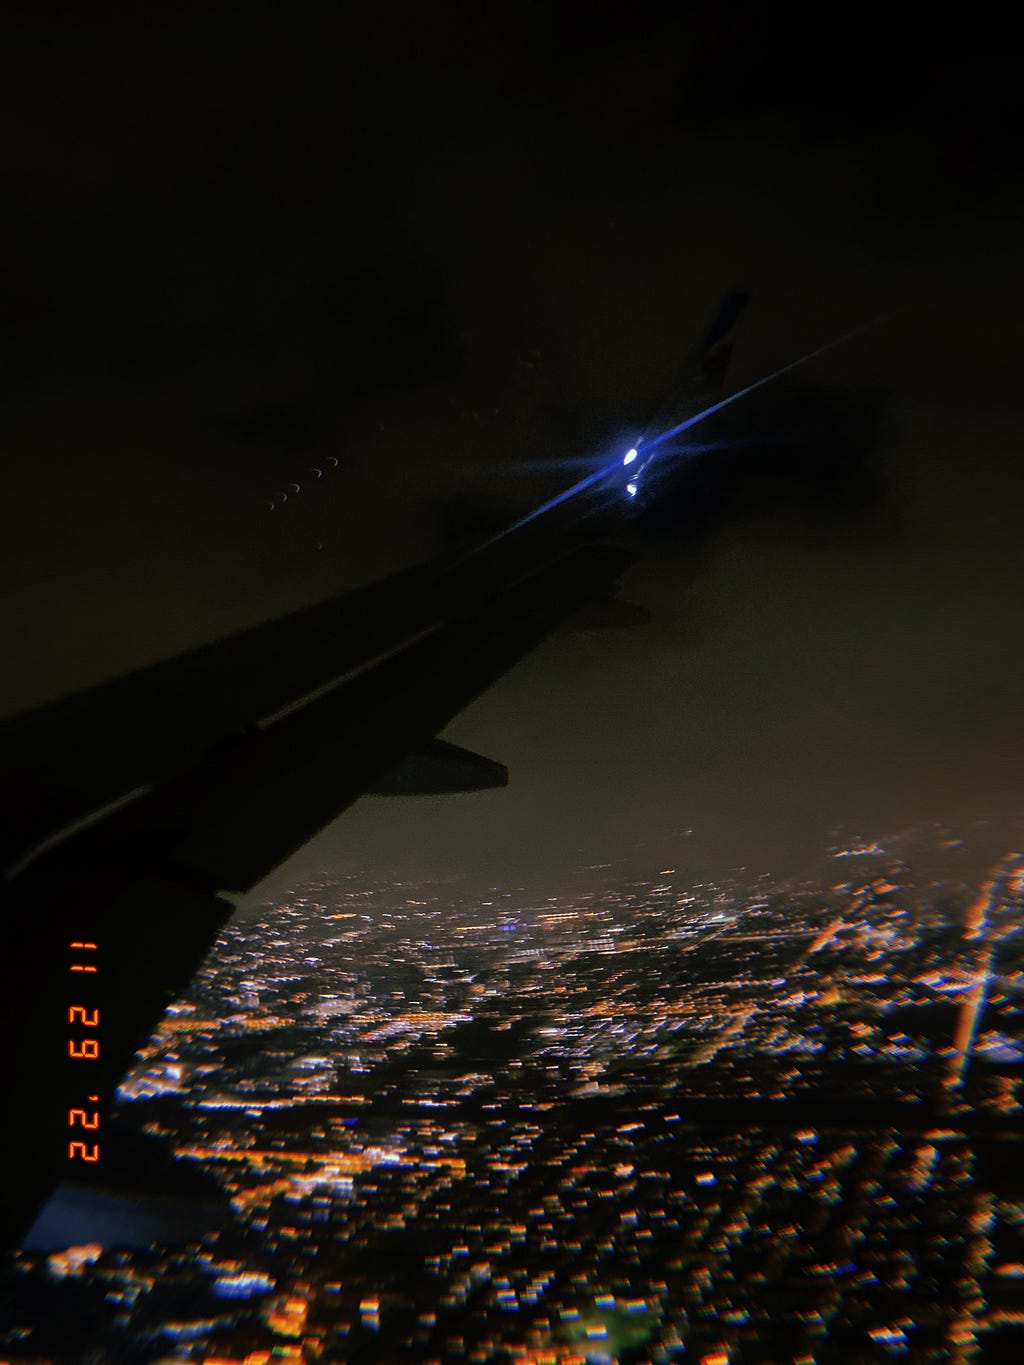 an image of a plane’s right wing drapped in shadows against a city lights at night